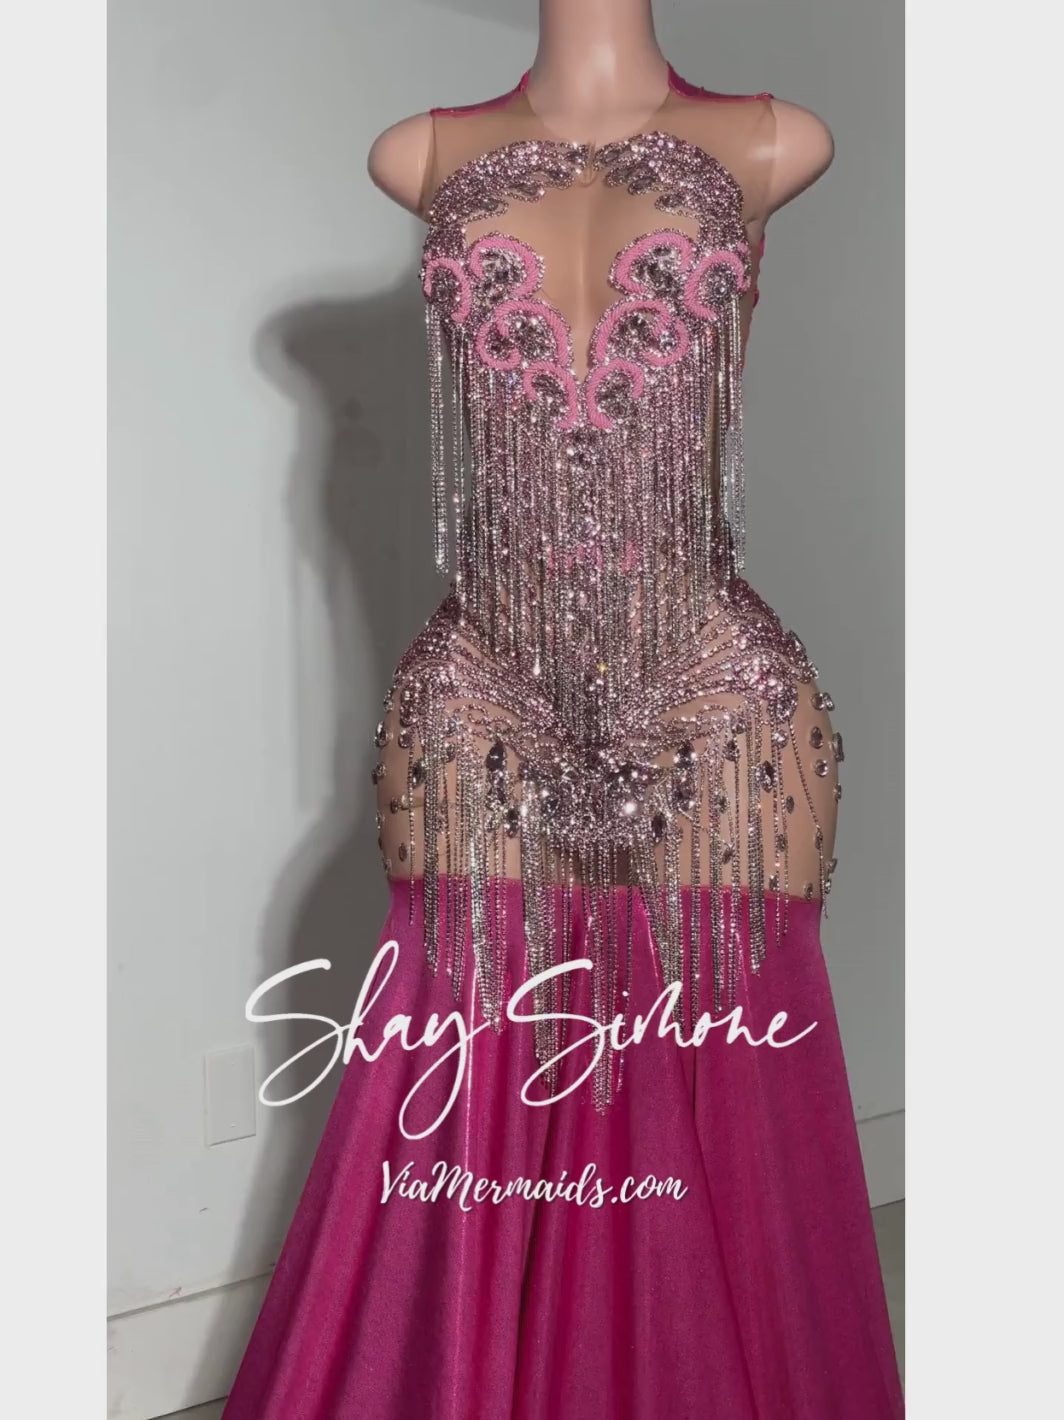 PINK IT GIRL 4.0 FRINGE EVENING GOWN! SHIP ESTIMATED: 05/07